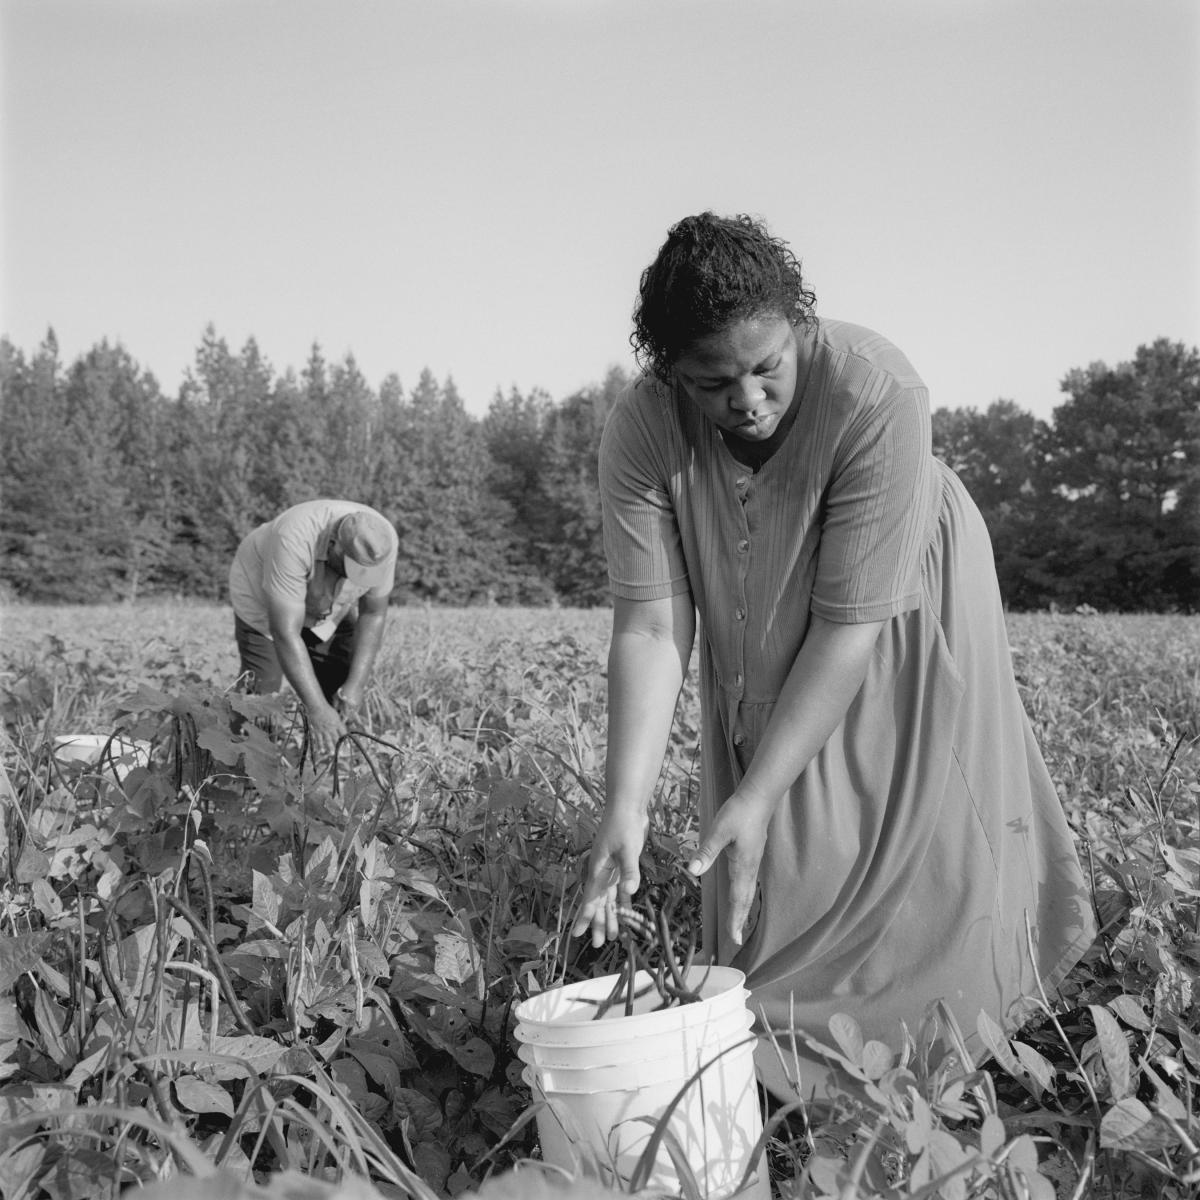 <p><center>Sumter County, Alabama:</center></p>
Anne Williams helps her husband, Charles pick peas and other produce during harvest season. : Images : AMERICAN BLACK FARMERS PROJECT - John Ficara